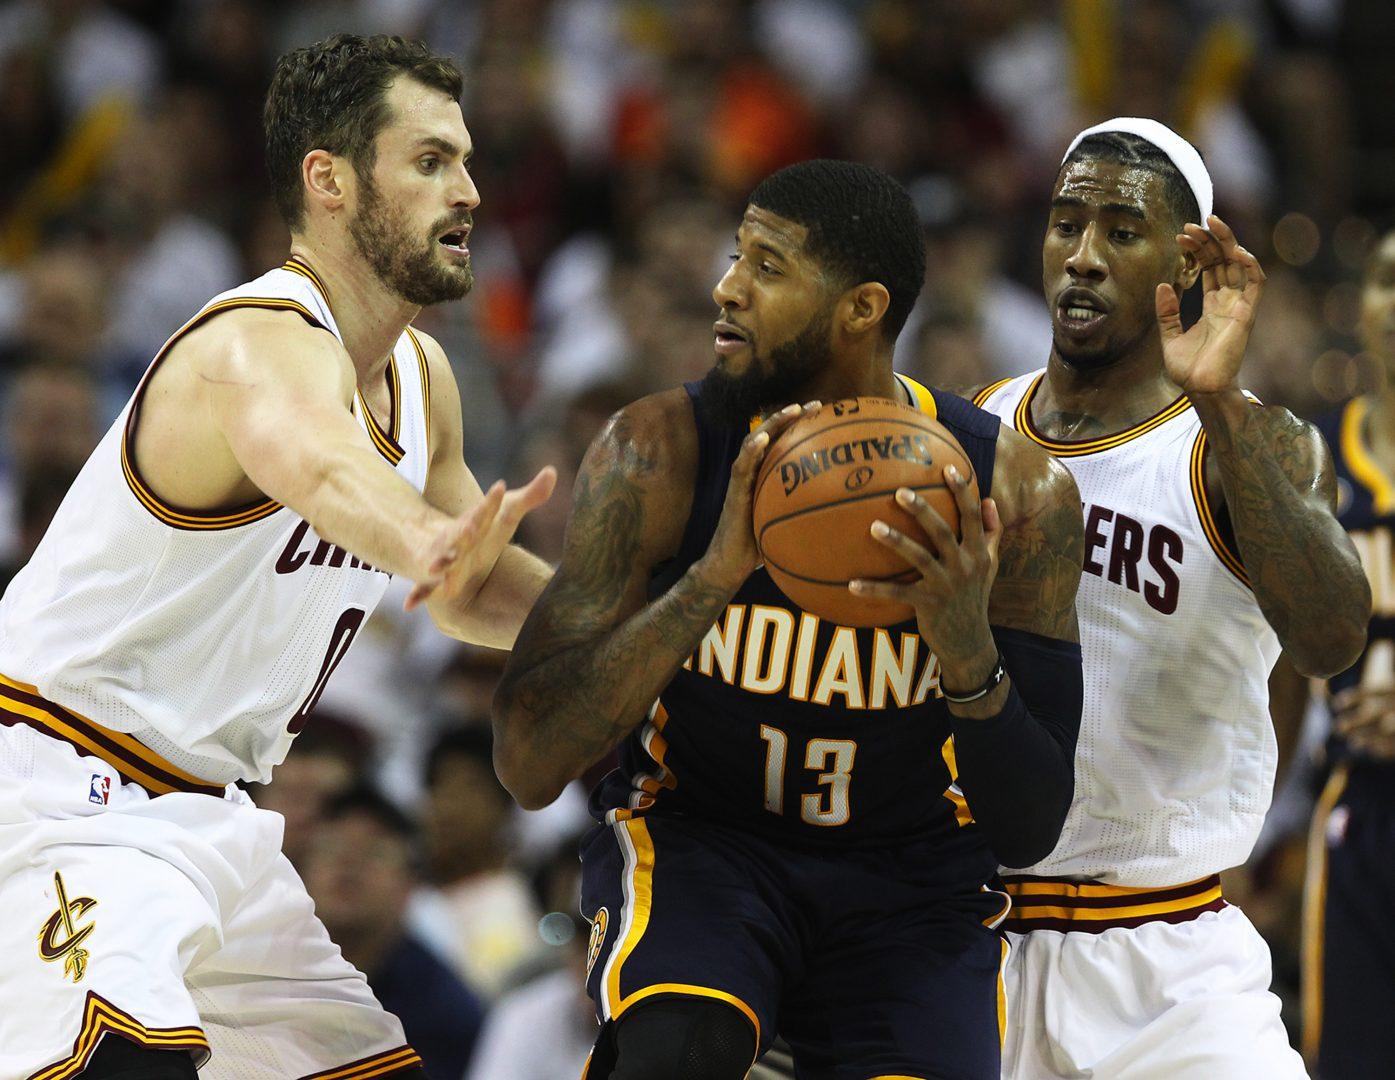 Cleveland Cavaliers forward Kevin Love and Iman Shumpert double-team Indiana Pacers forward Paul George during the third quarter in Game 2 of an Eastern Conference playoff game on Monday, April 17, 2017, at Quicken Loans Arena in Cleveland, Ohio. The Cleveland Cavaliers beat the Indiana Pacers 117-111. (Leah Klafczynski/Akron Beacon Journal/TNS)